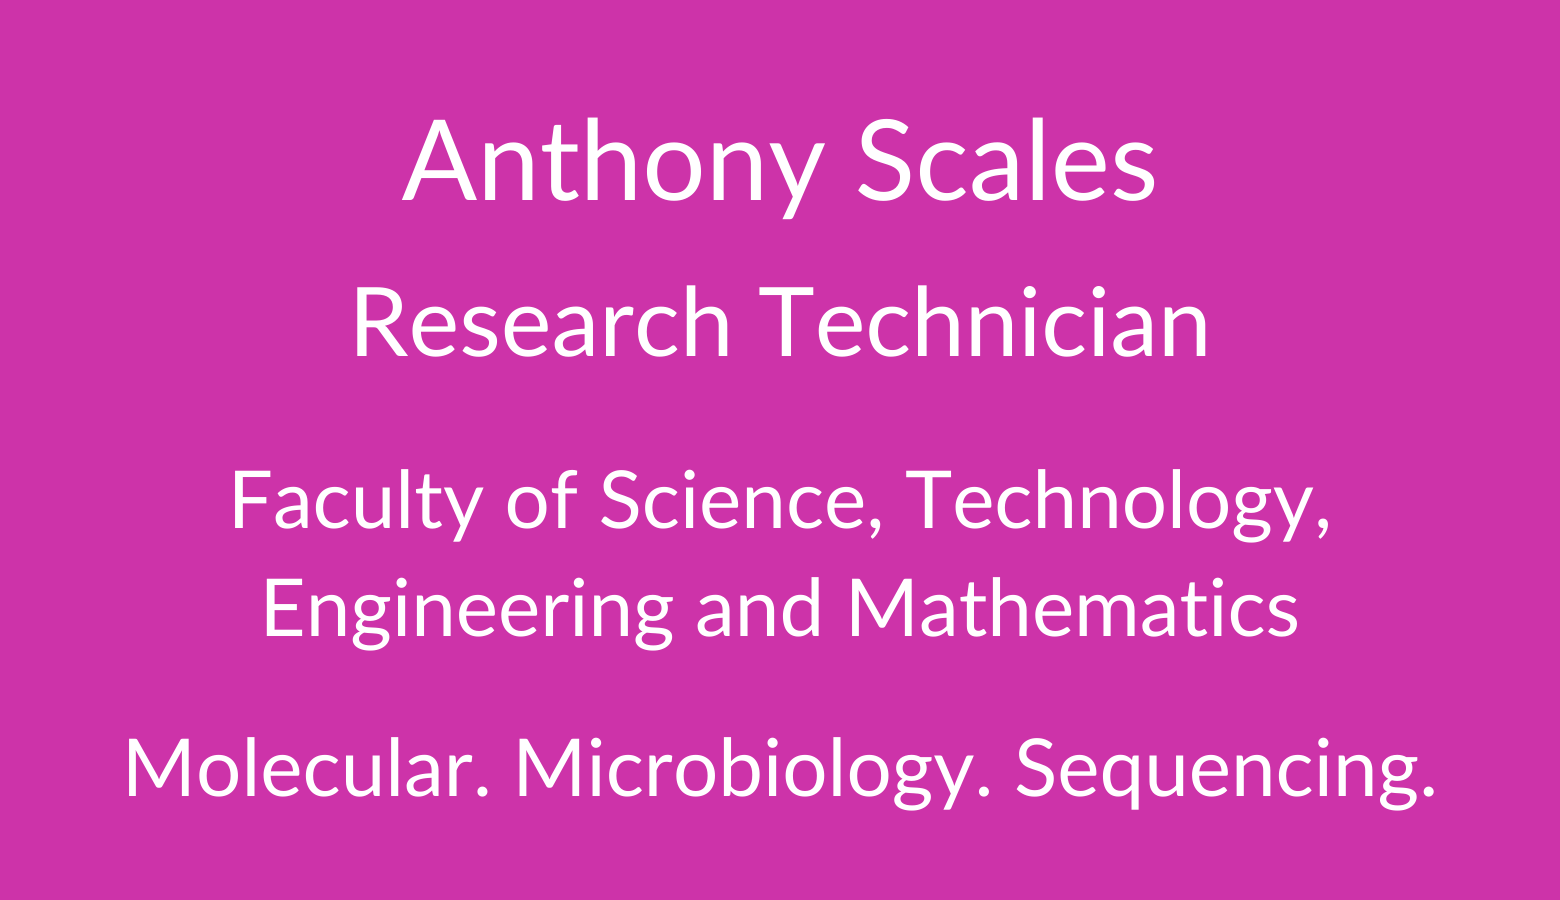 Anthony Scales. Research Technician. Faculty of Science. Technology, Engineering and Mathematics. Molecular. Microbiology. Metagenomics.